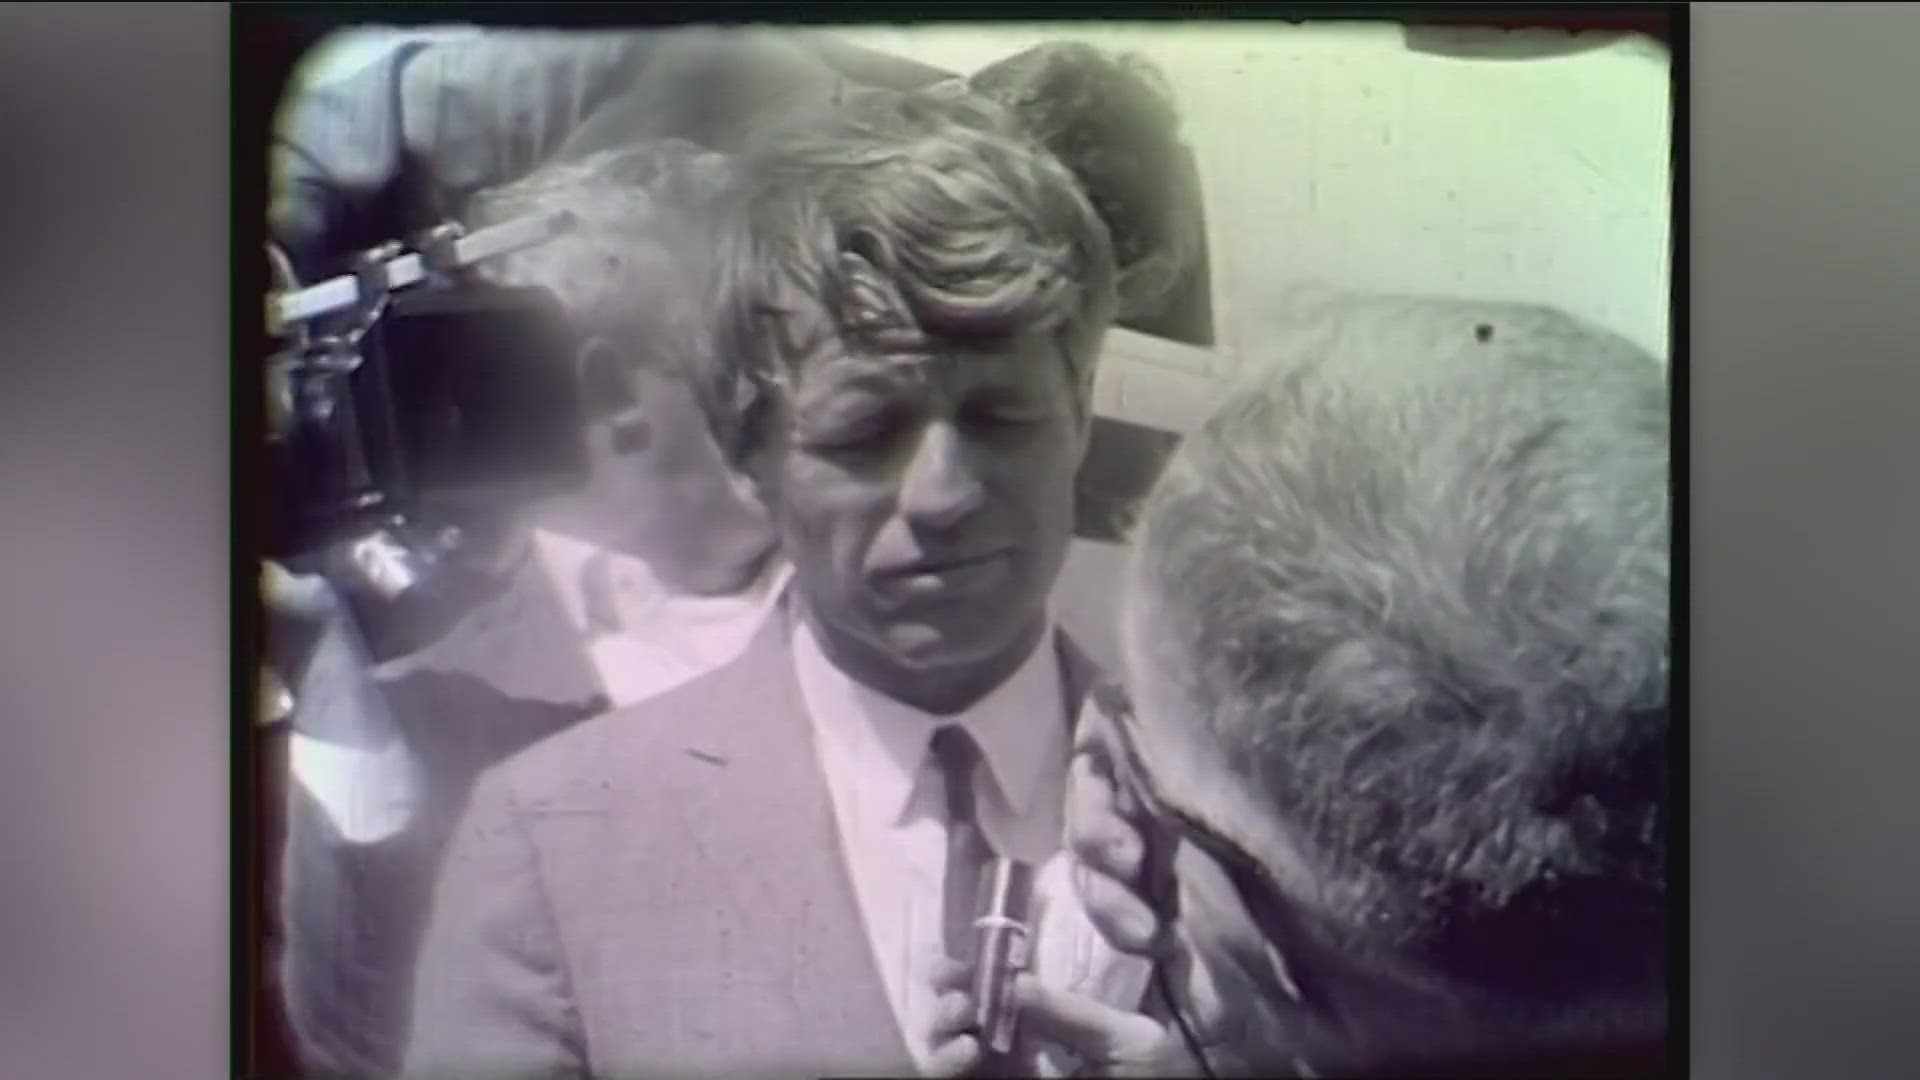 On this day 55 years ago, then-Senator Robert Kennedy campaigned for president in Idaho. Kennedy campaigned for civil right, ending war in Vietnam& ending poverty.